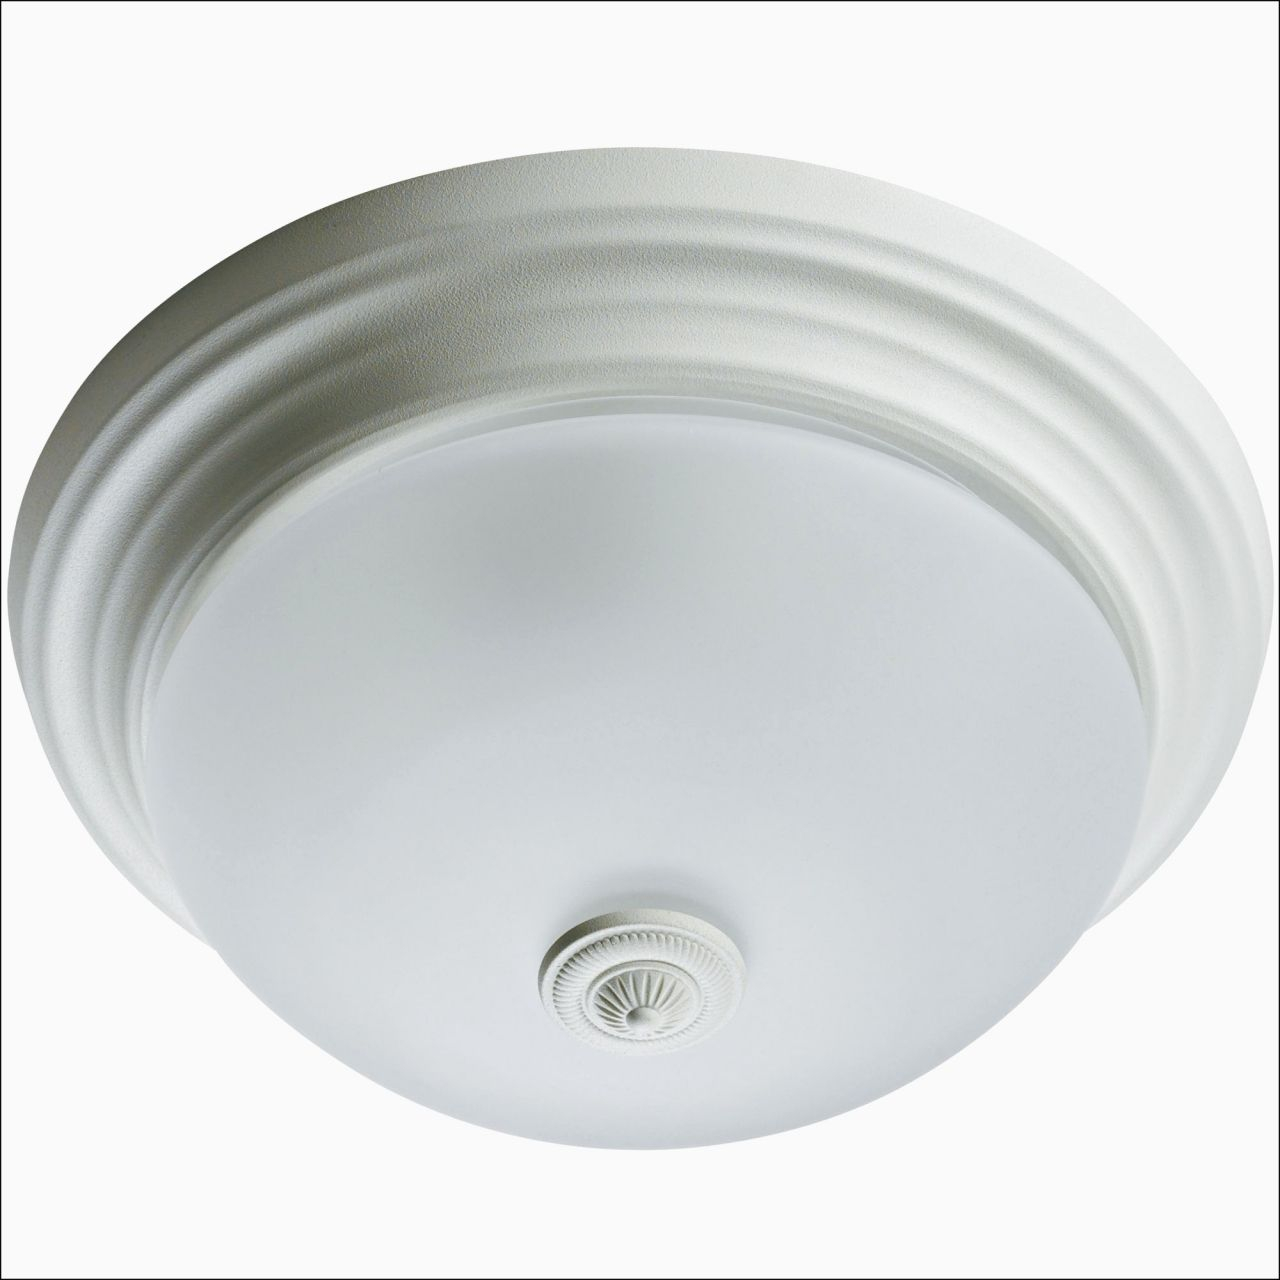 77 Ventless Bathroom Exhaust Fan With Light Check More At pertaining to sizing 1280 X 1280